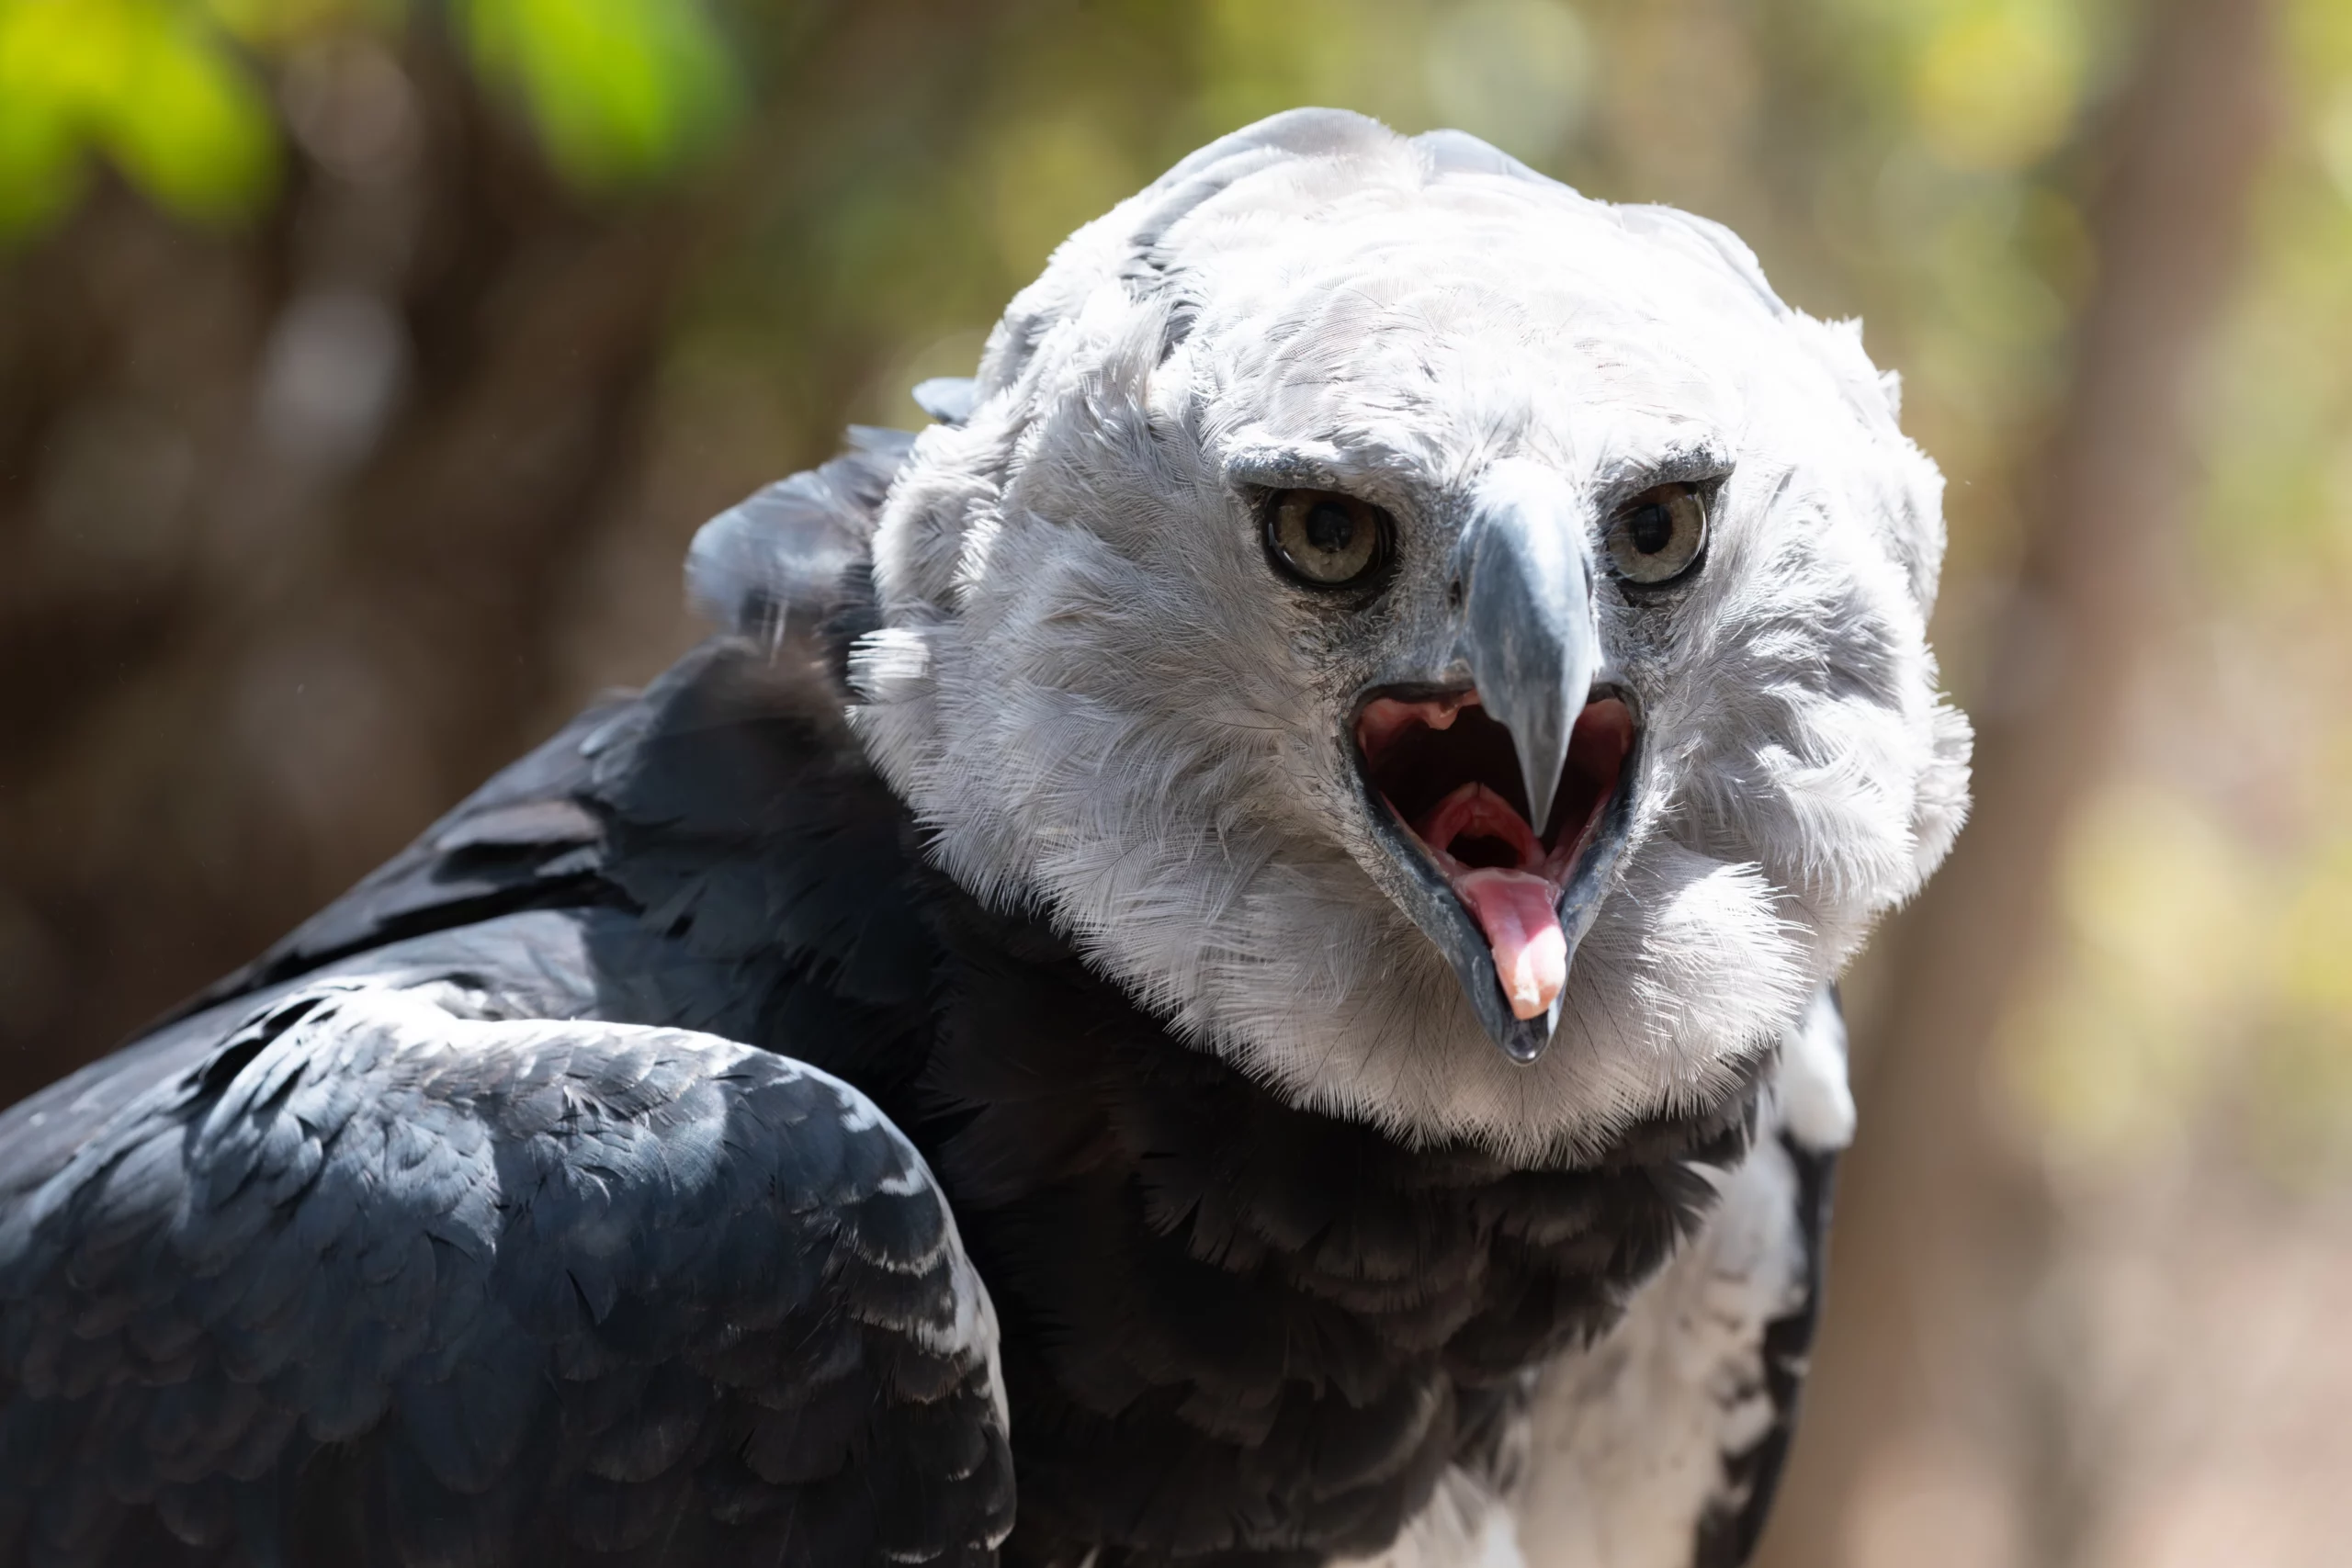 The Majestic Harpy Eagle: The Largest and Most Powerful Raptor in the World